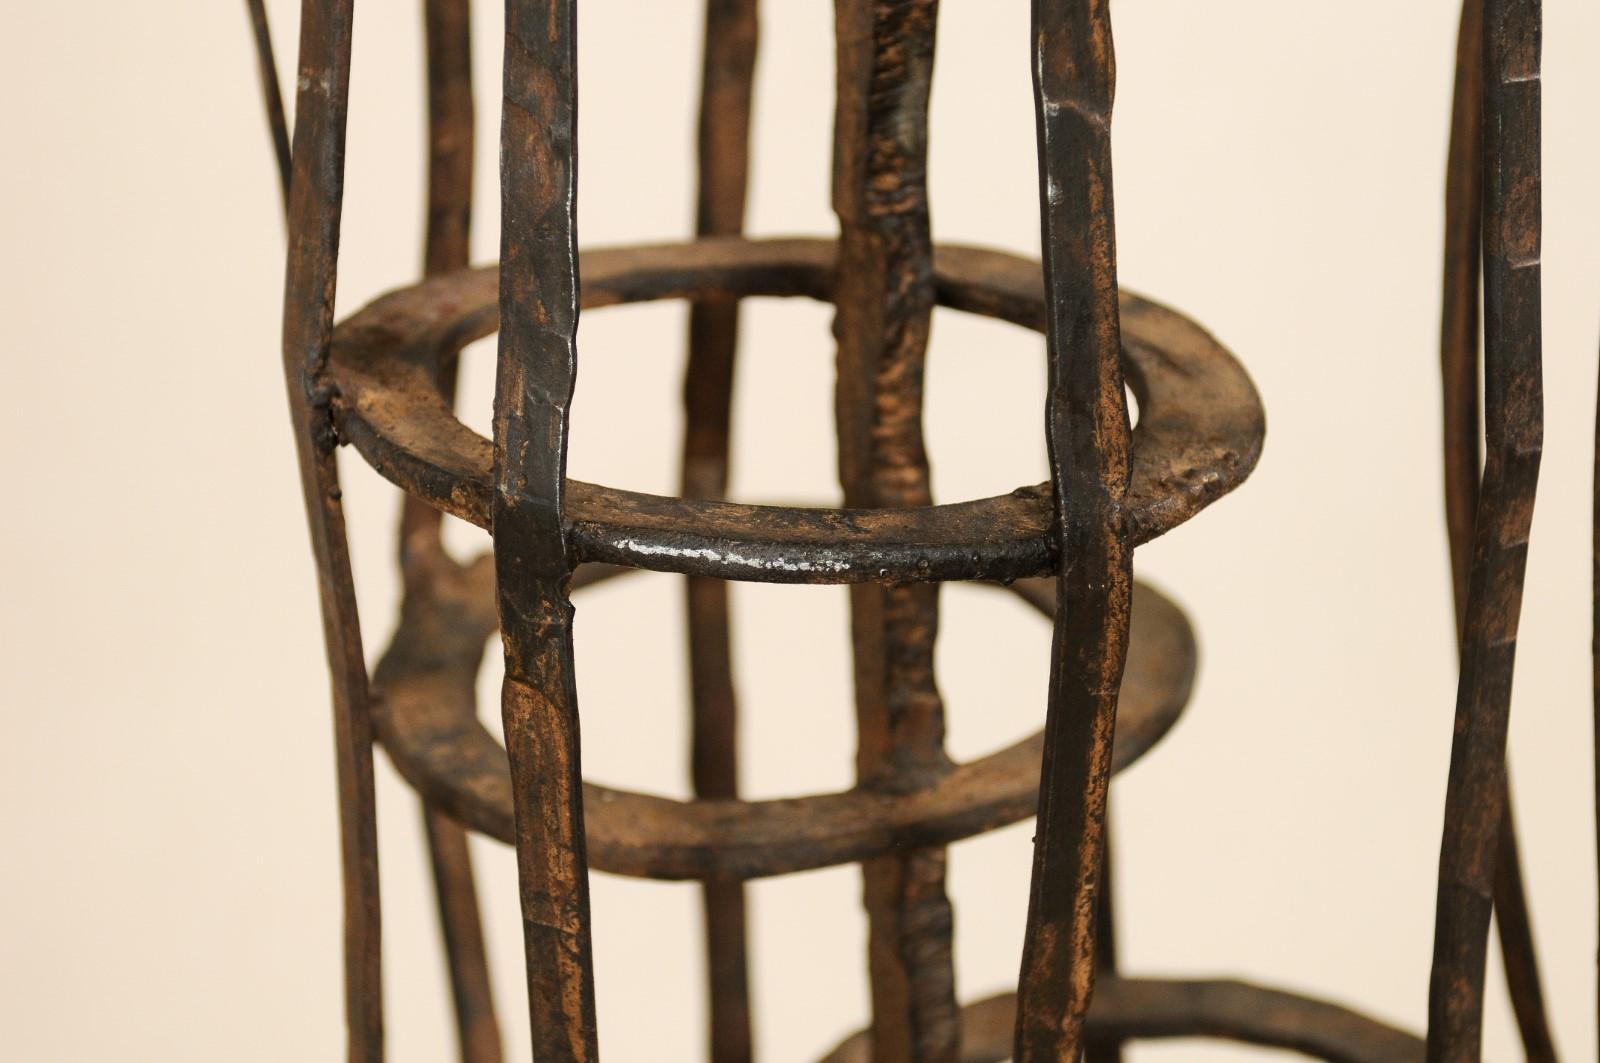 Tall French Sculptural Iron Abstract Art Piece, circa 1930s-1940s For Sale 1